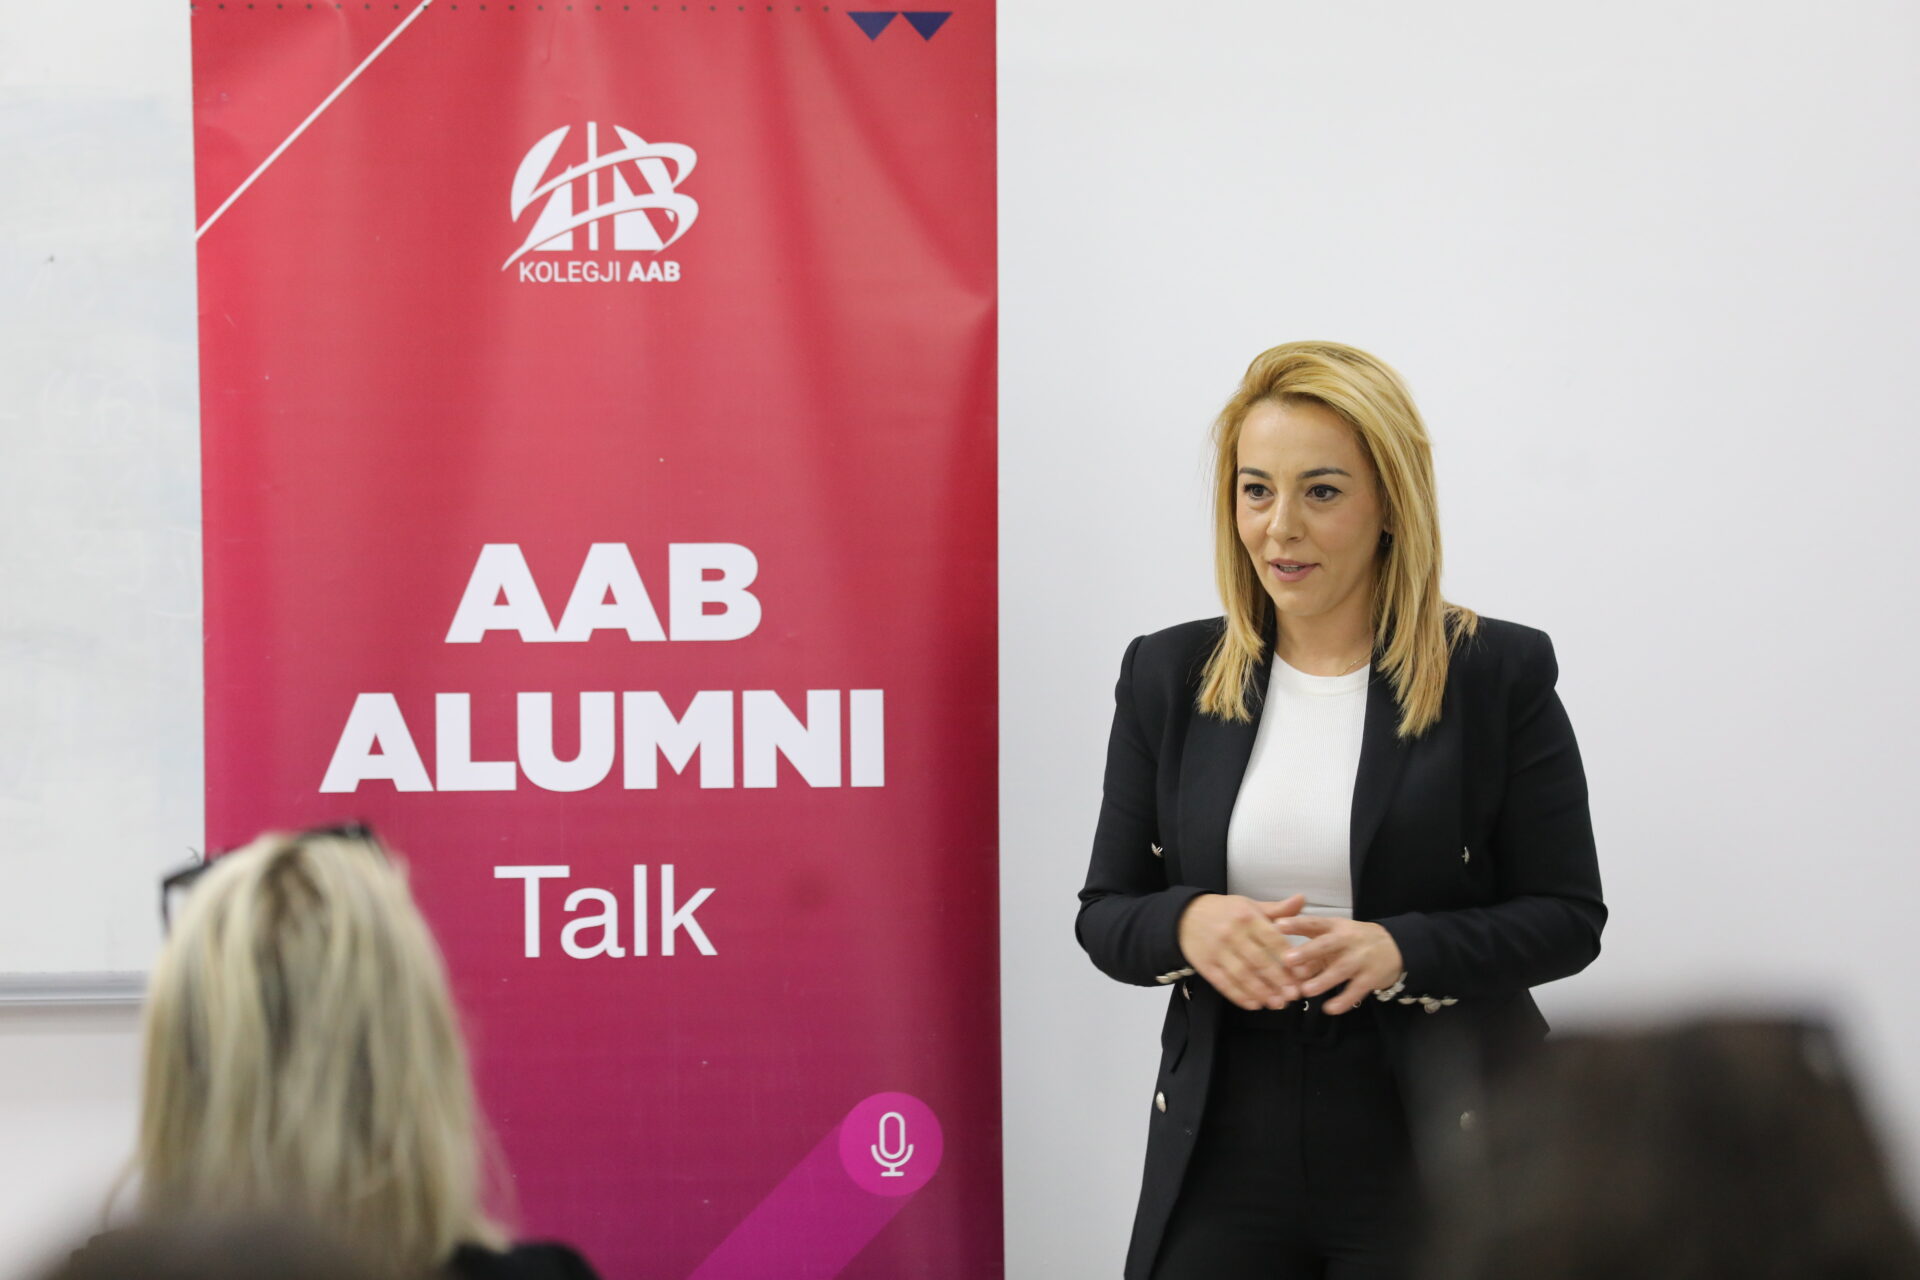 The AAB College student who opened the preschool shares her story on Alumni Talk